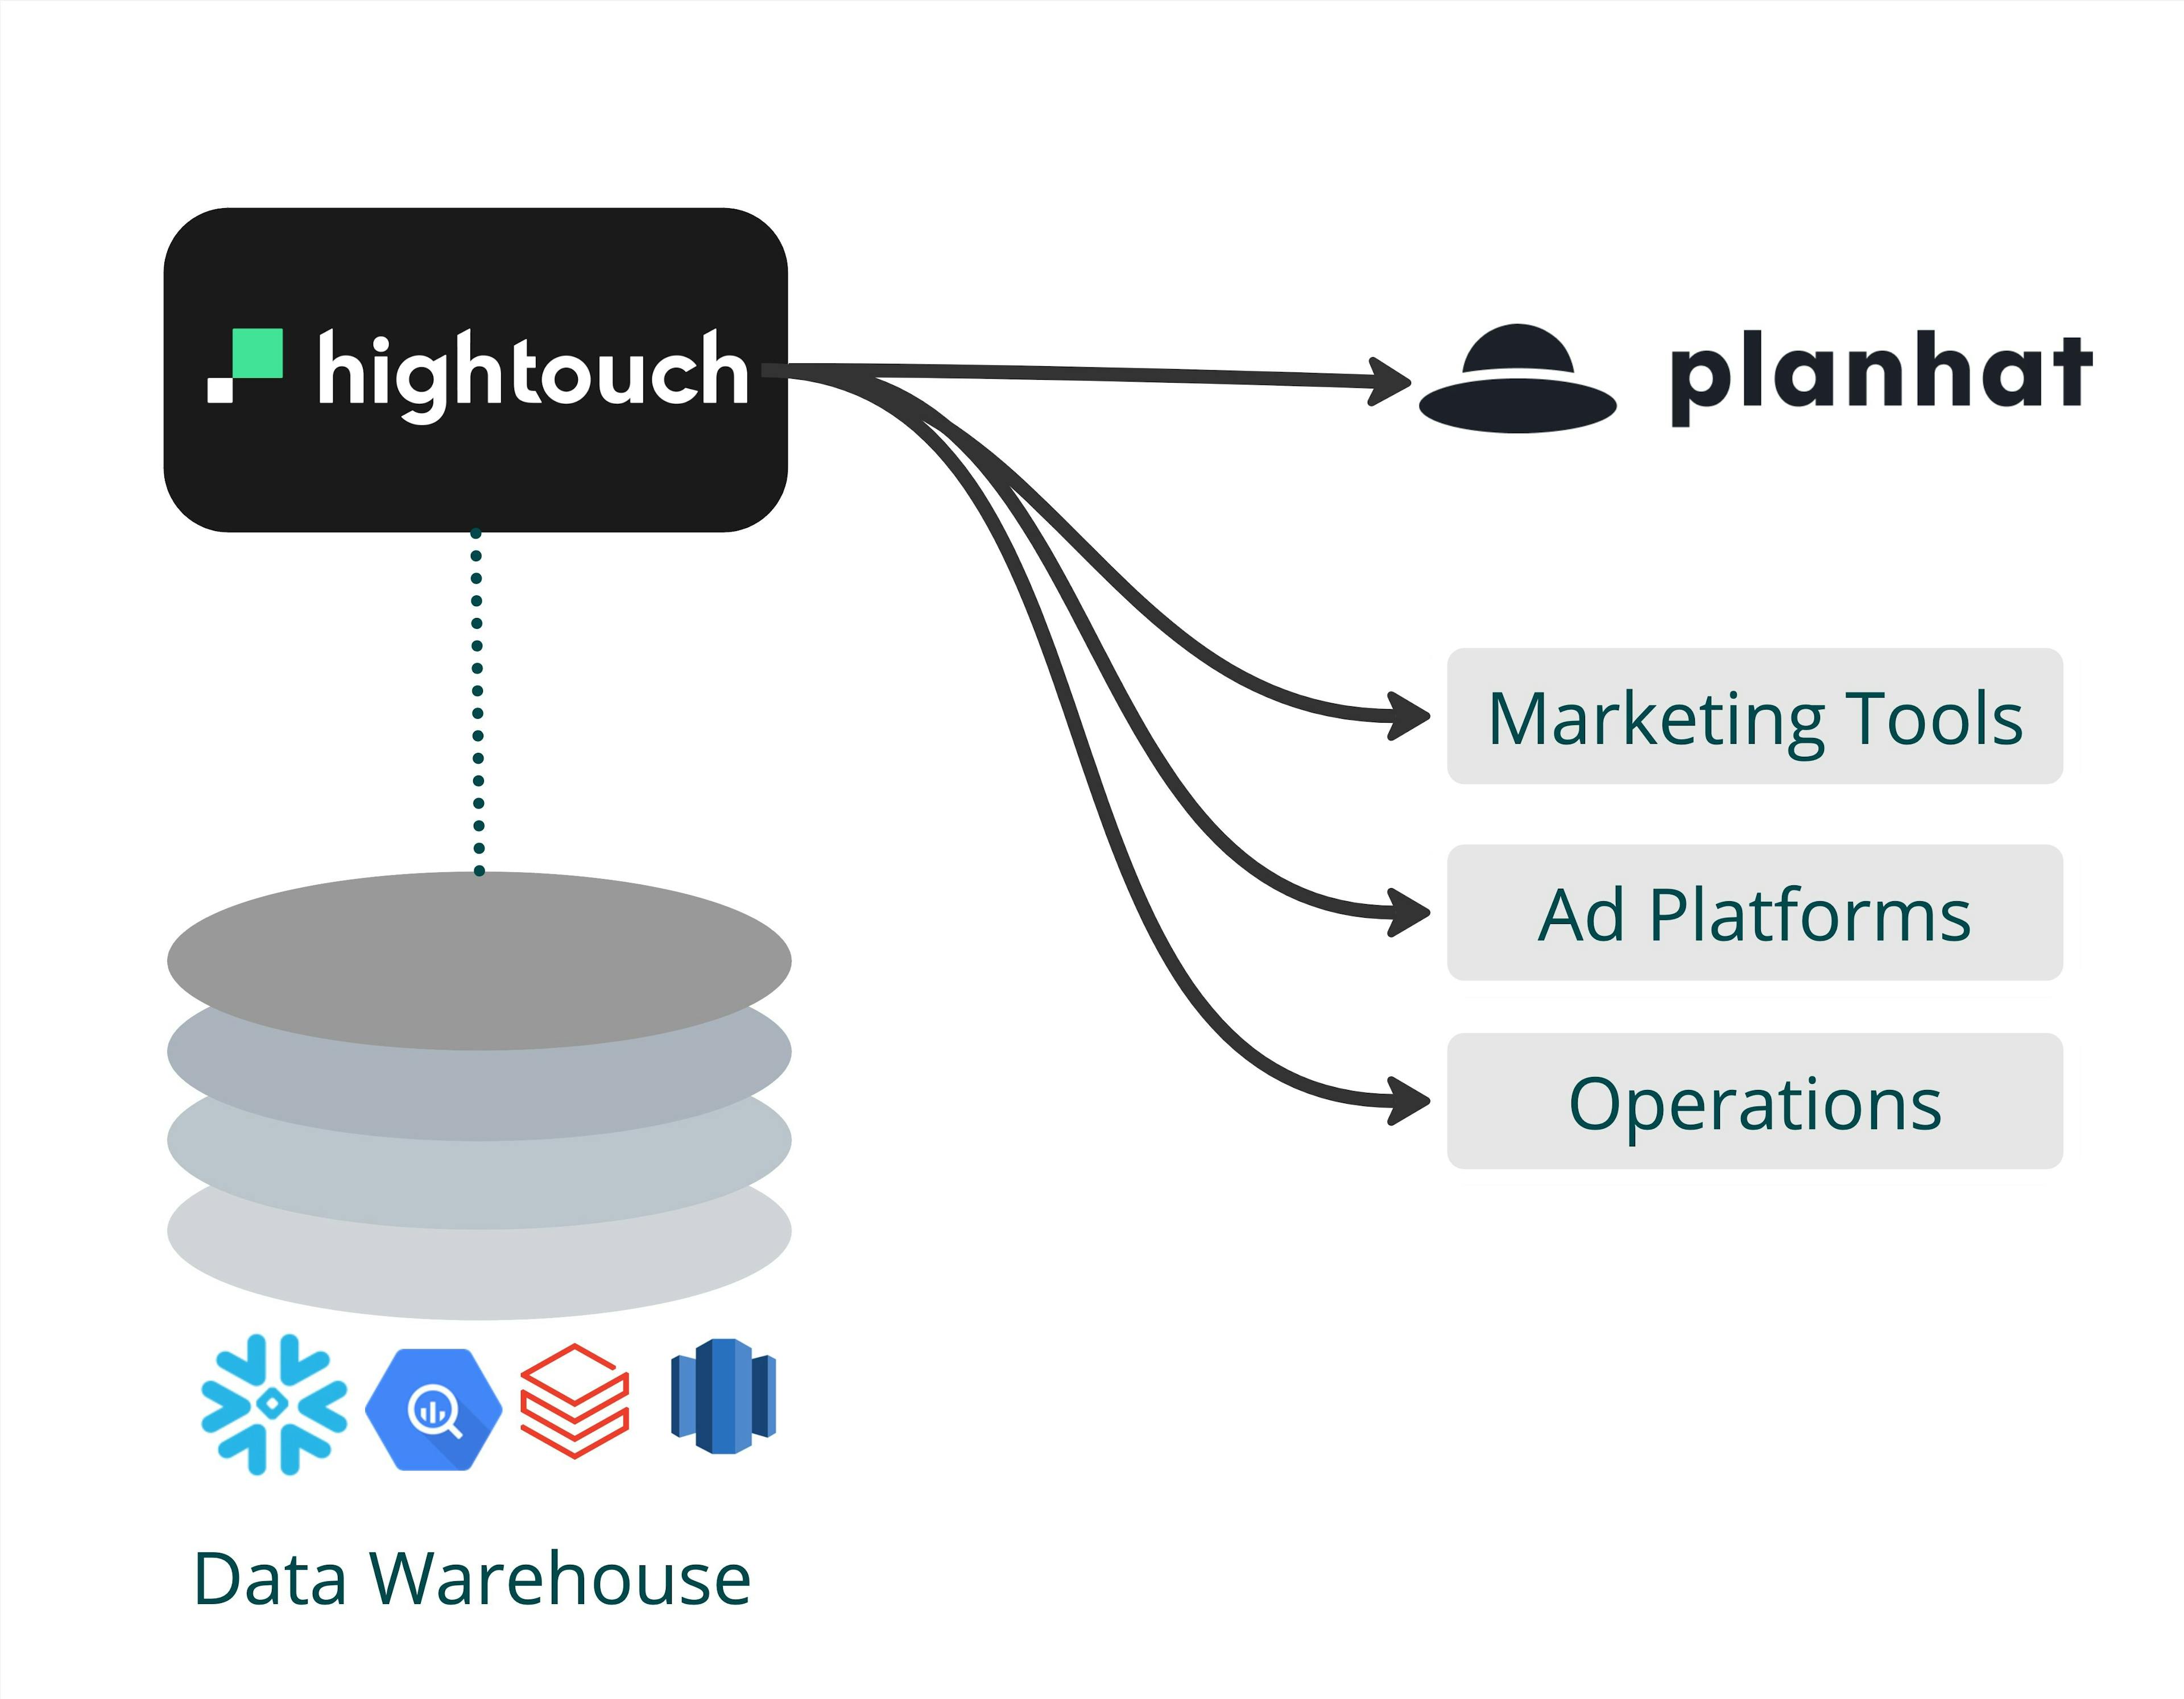 Sync data into planhat with Hightouch